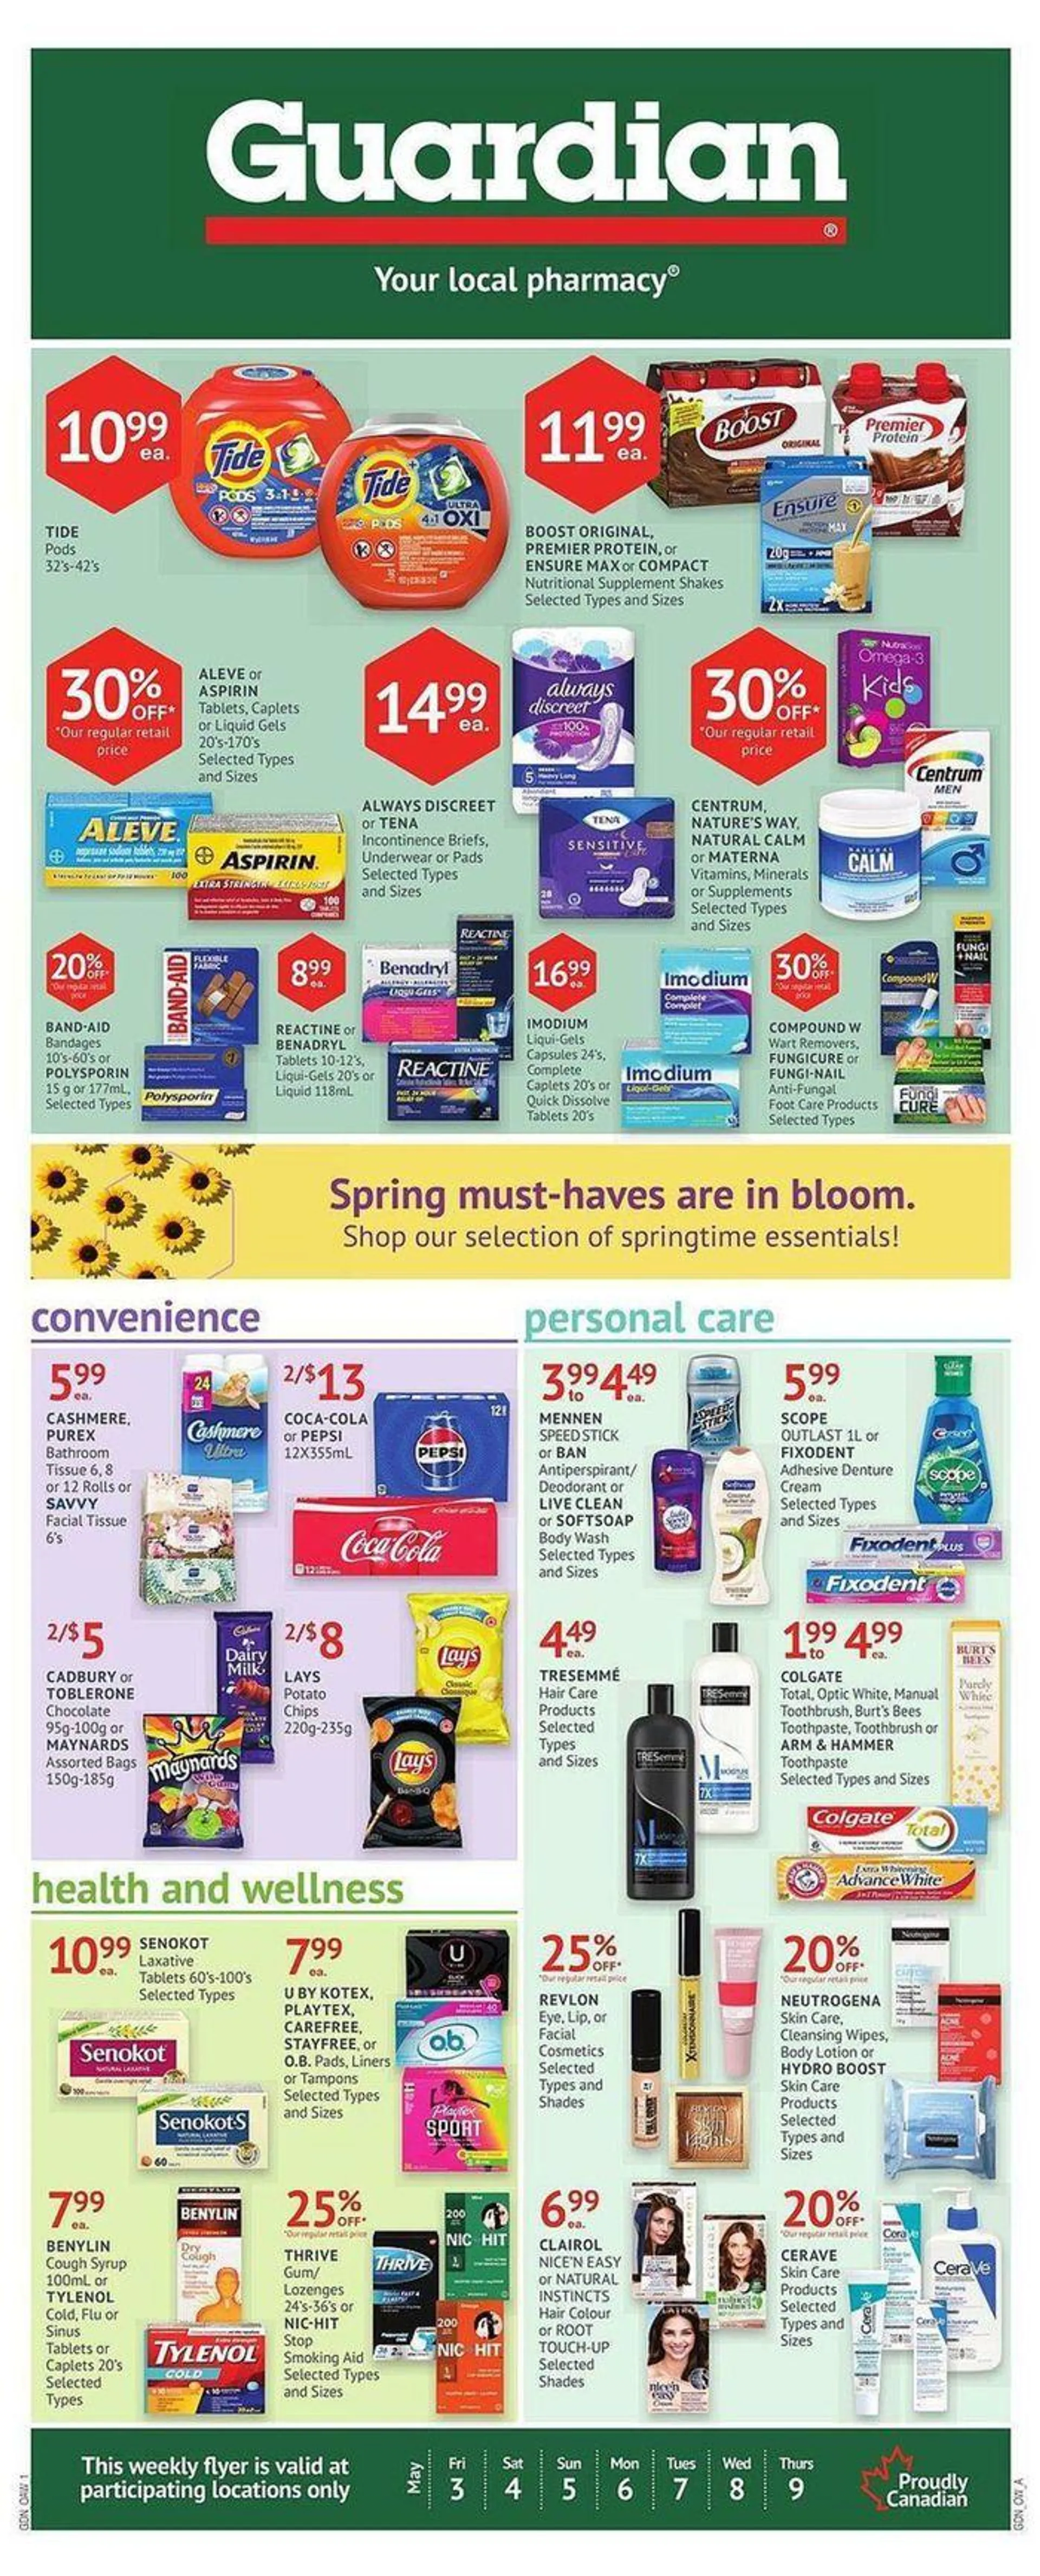 Guardian Pharmacy Spring Deals - 1